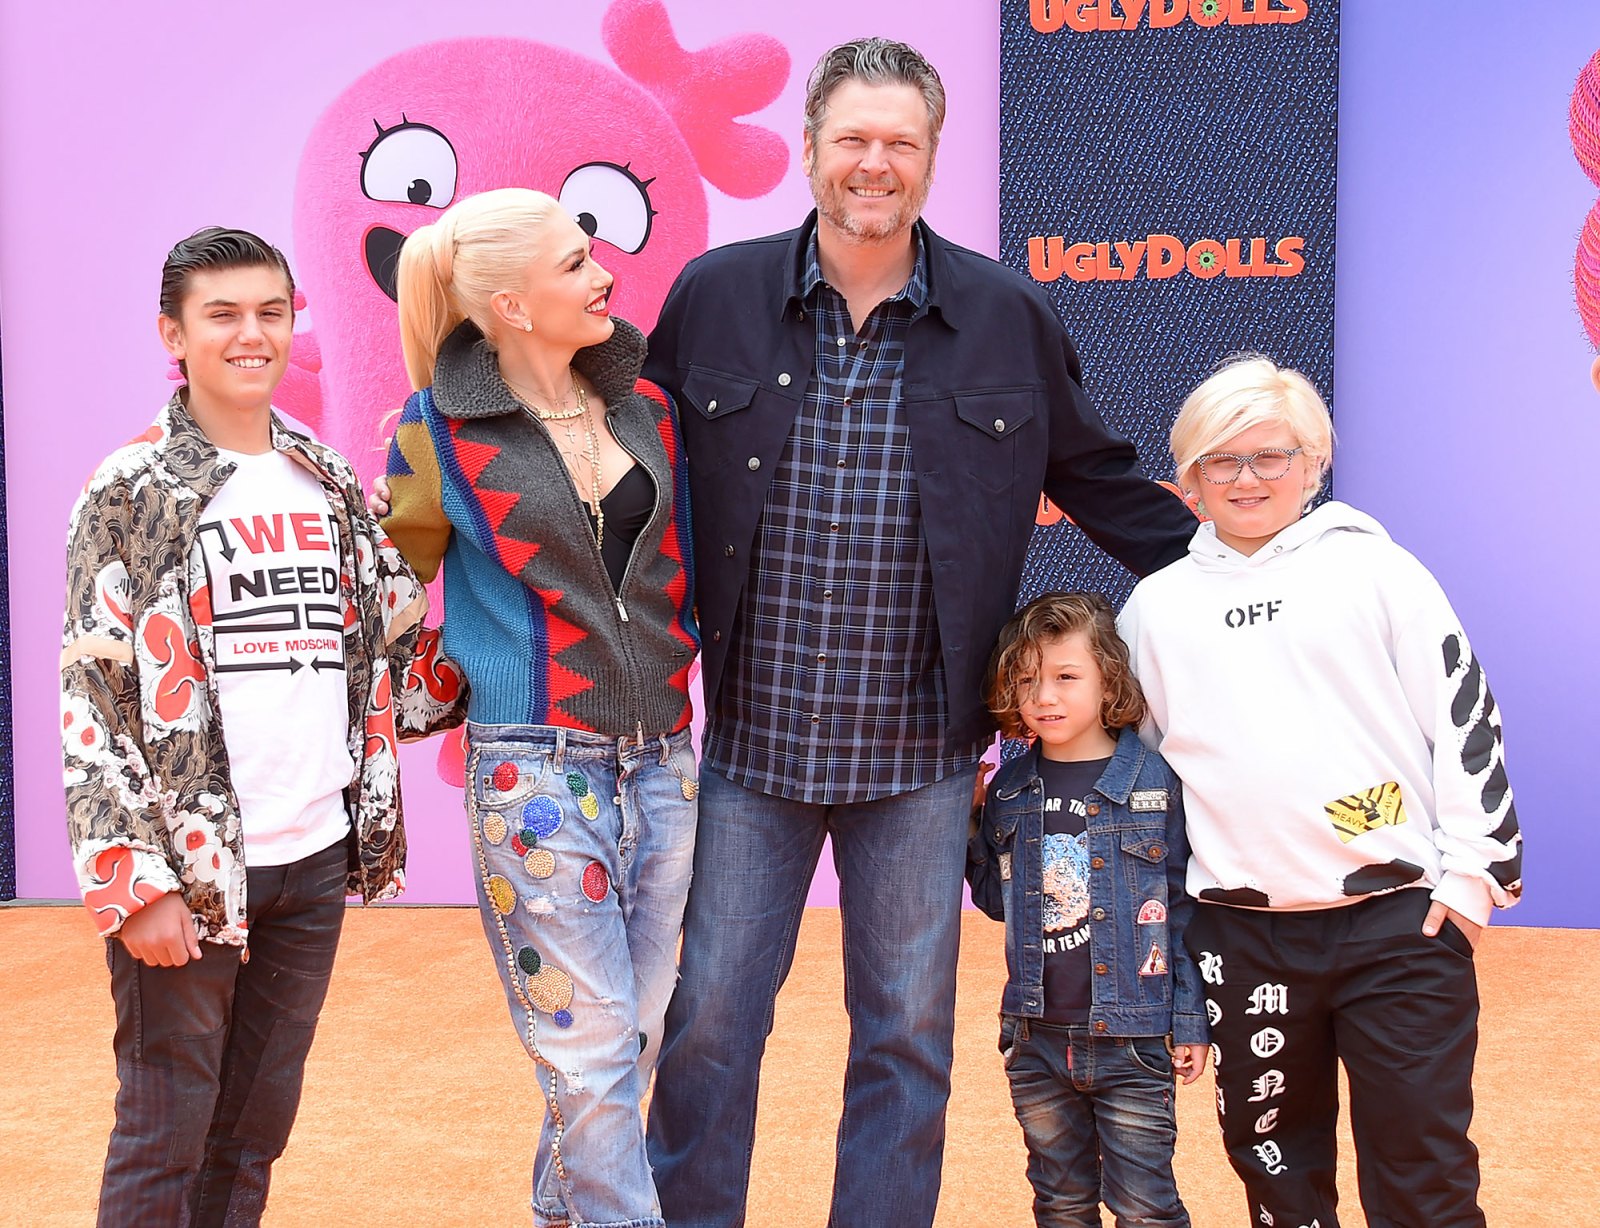 Blake Shelton Sweetest Photos With Gwen Stefani 3 Sons Over the Years Feature